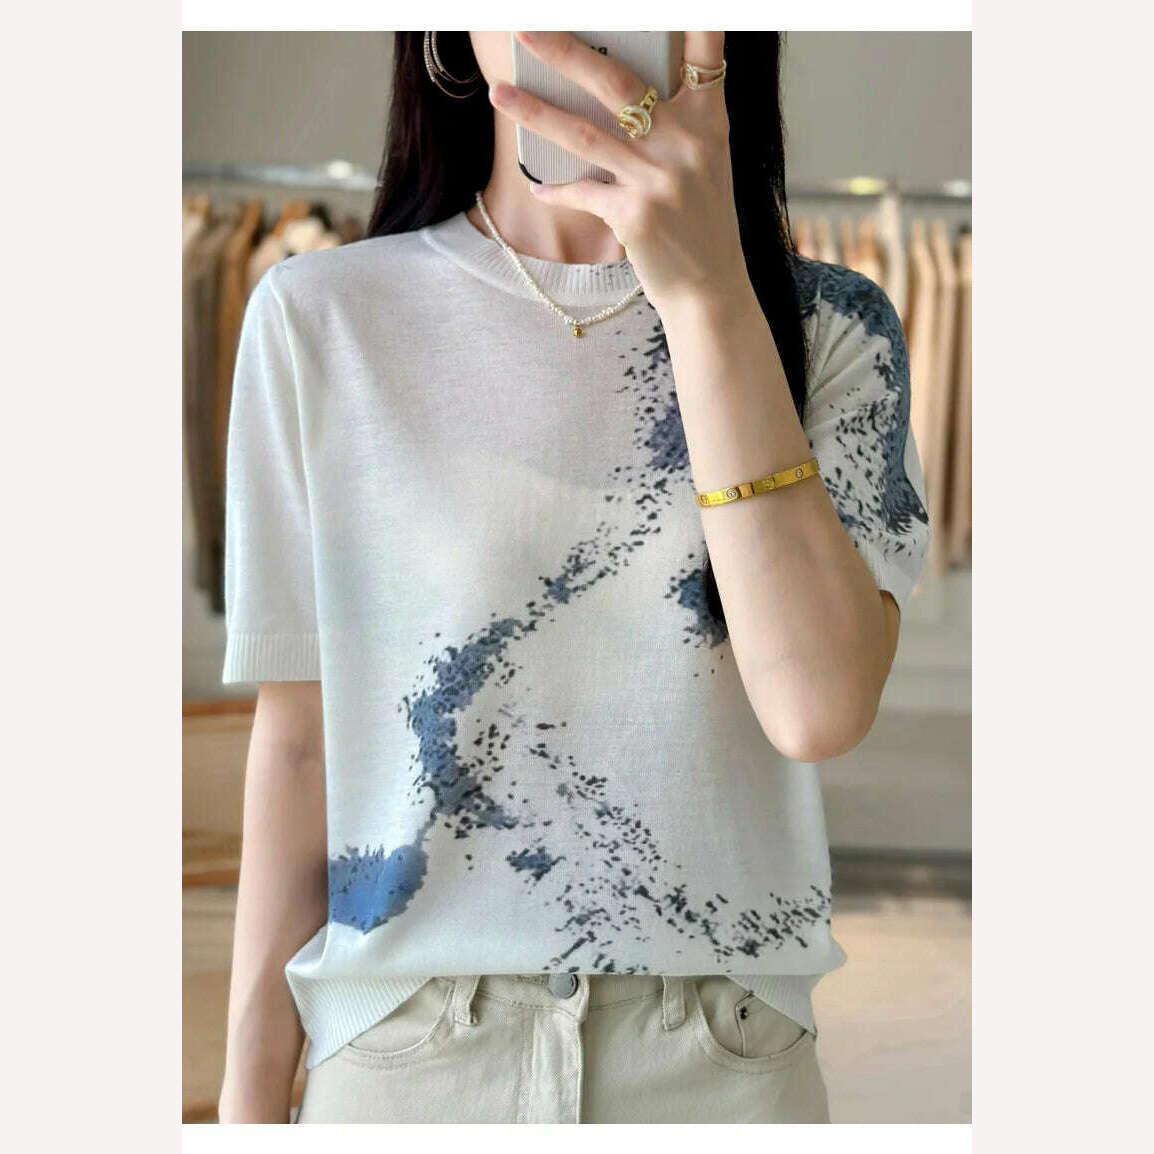 KIMLUD, Summer Thin Worsted Wool Short Sleeve Printed Graffiti Sweater Women's Low Round Neck Pullover Loose Slim Half Sleeve T-shirt, KIMLUD Women's Clothes